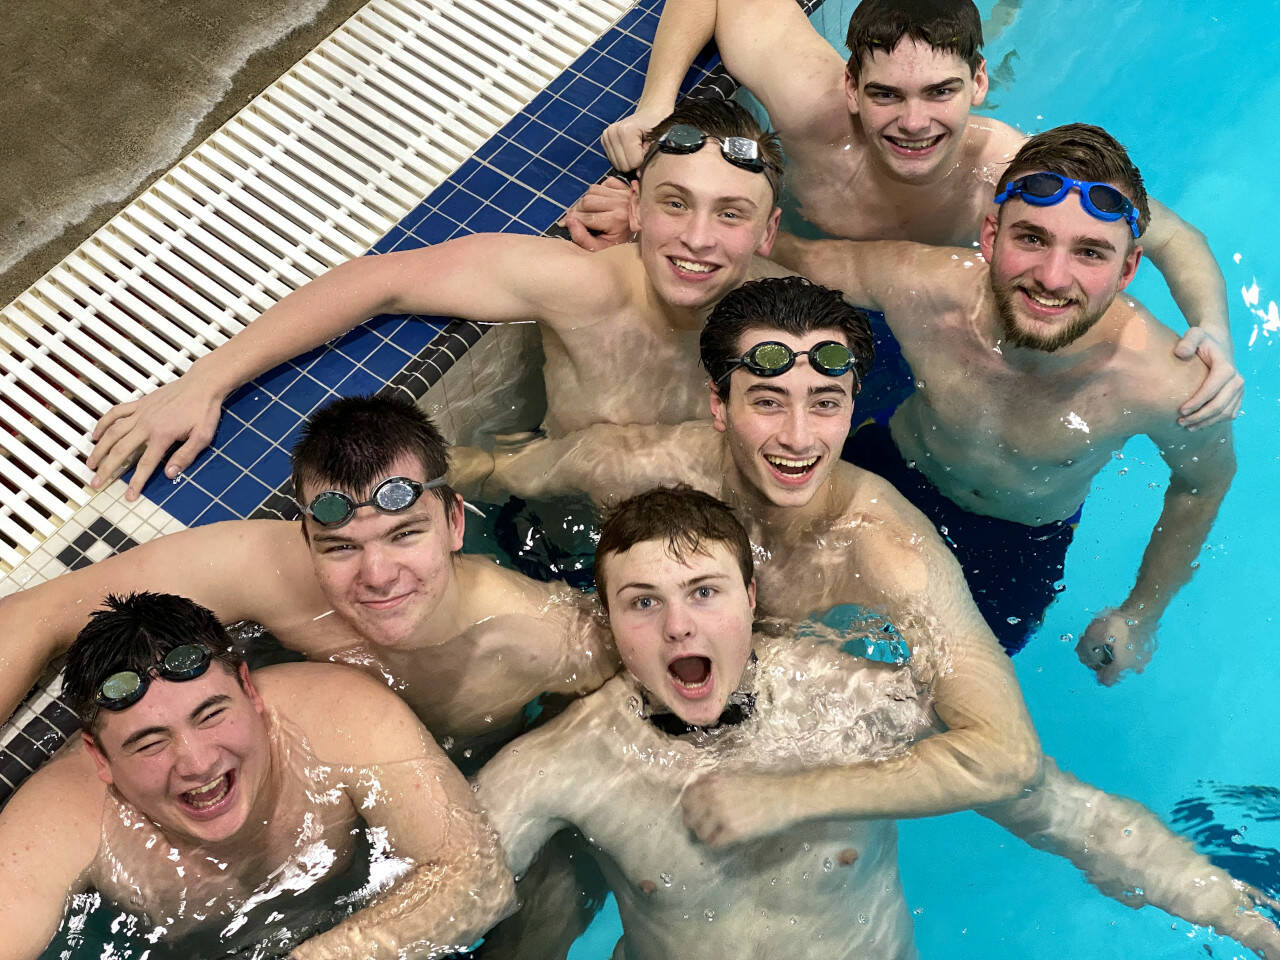 SUBMITTED PHOTO The Aberdeen boys swimming team (from top to bottom) Denny Linker, Jamieson Berney, Logen Seguin, Foster Patterson, Colton Burns, Tyler Bates and Zach Parker competed at the 2A state championship meet at the King County Aquatic Center in Federal Way on Friday.